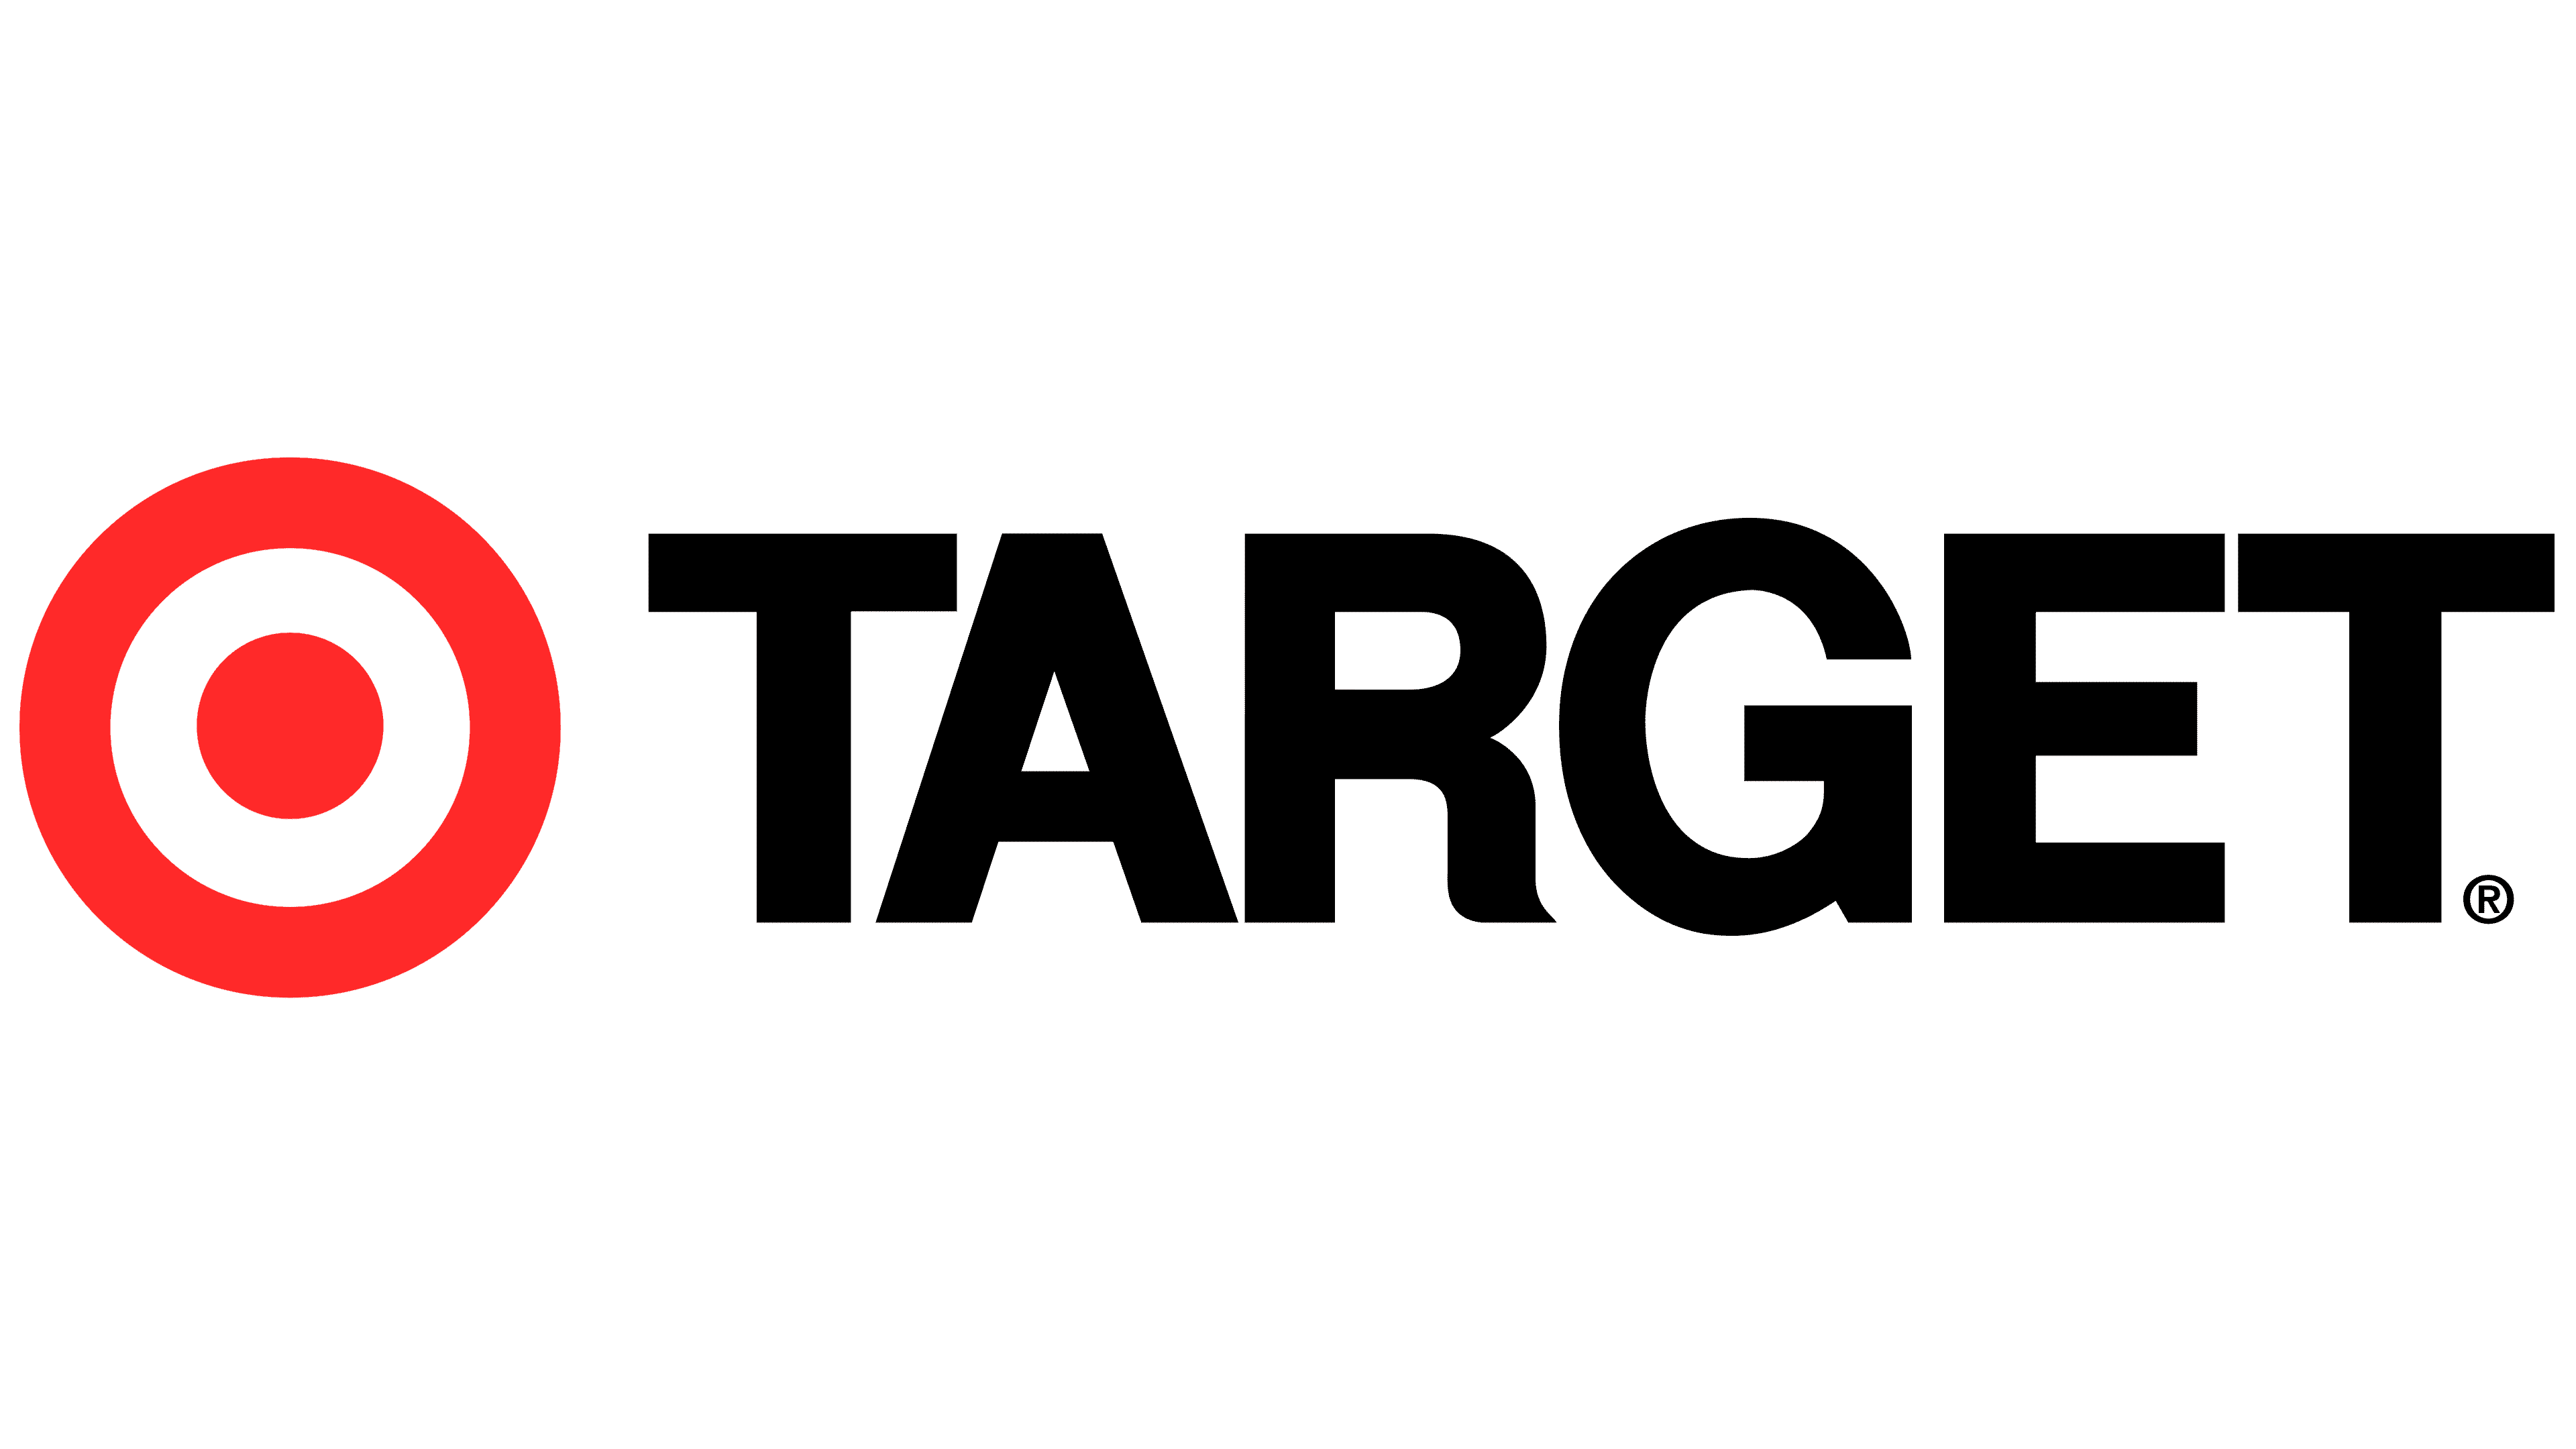 Target vector icon isolated on transparent background, Target logo concept  - Stock Image - Everypixel